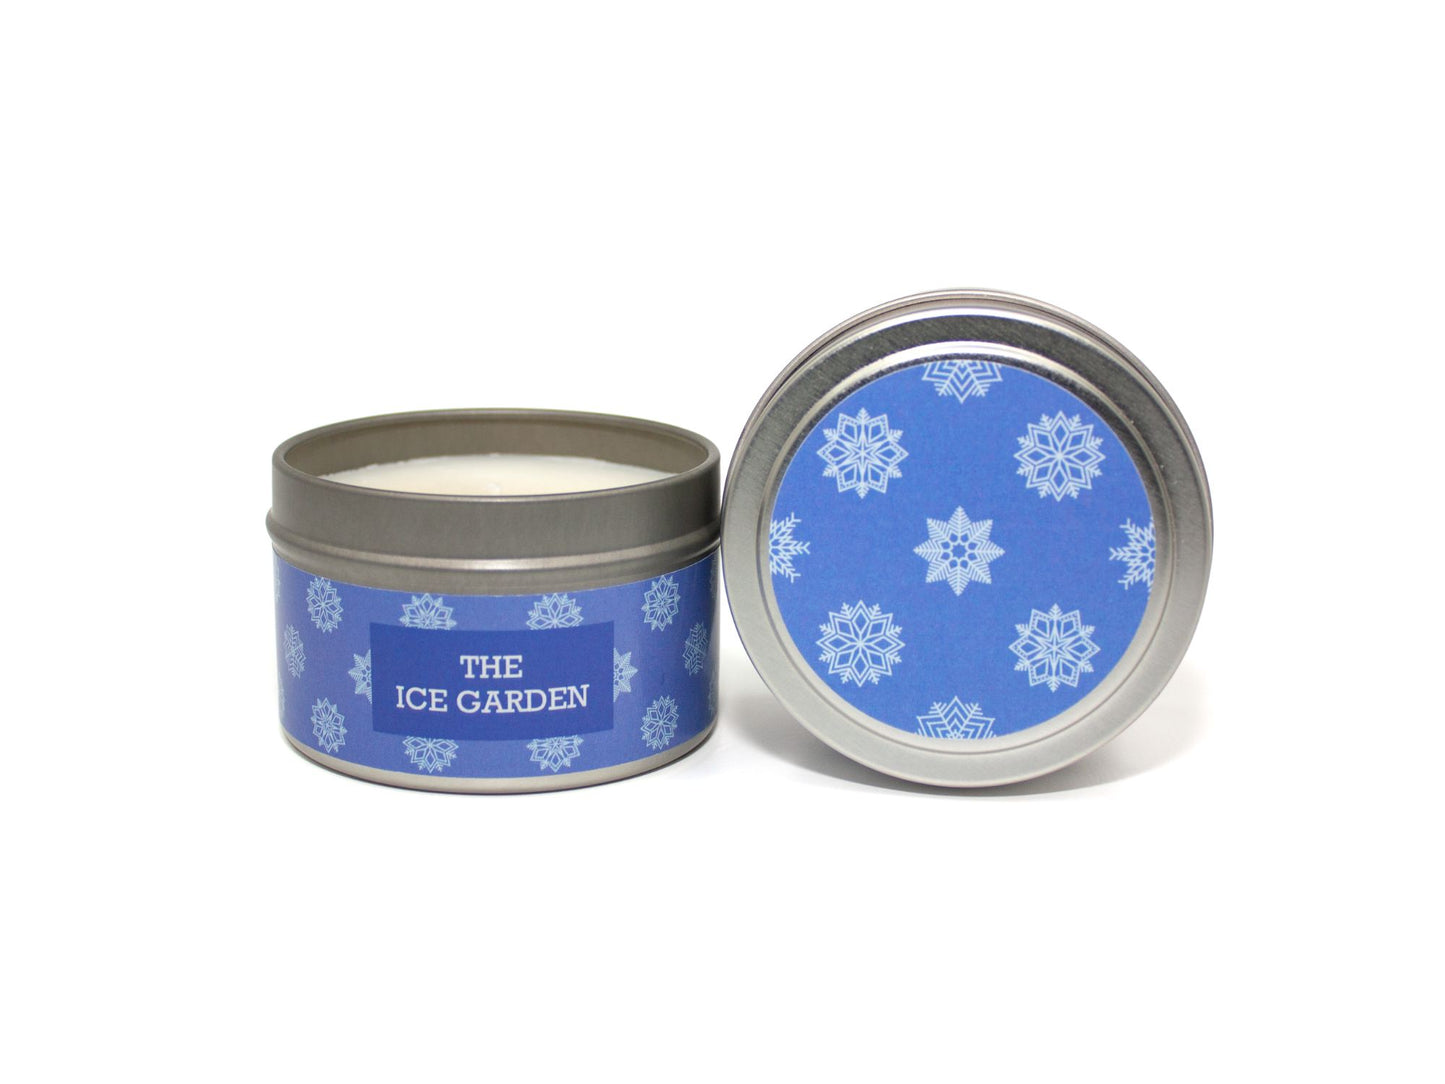 Onset & Rime juniper and mint scented candle called "The Ice Garden" in a 4 oz silver tin. The circular label on top is blue with a pattern of lighter blue snowflakes. The text on the front label is "The Ice Garden - Fresh Juniper, Wintermint, Frost".